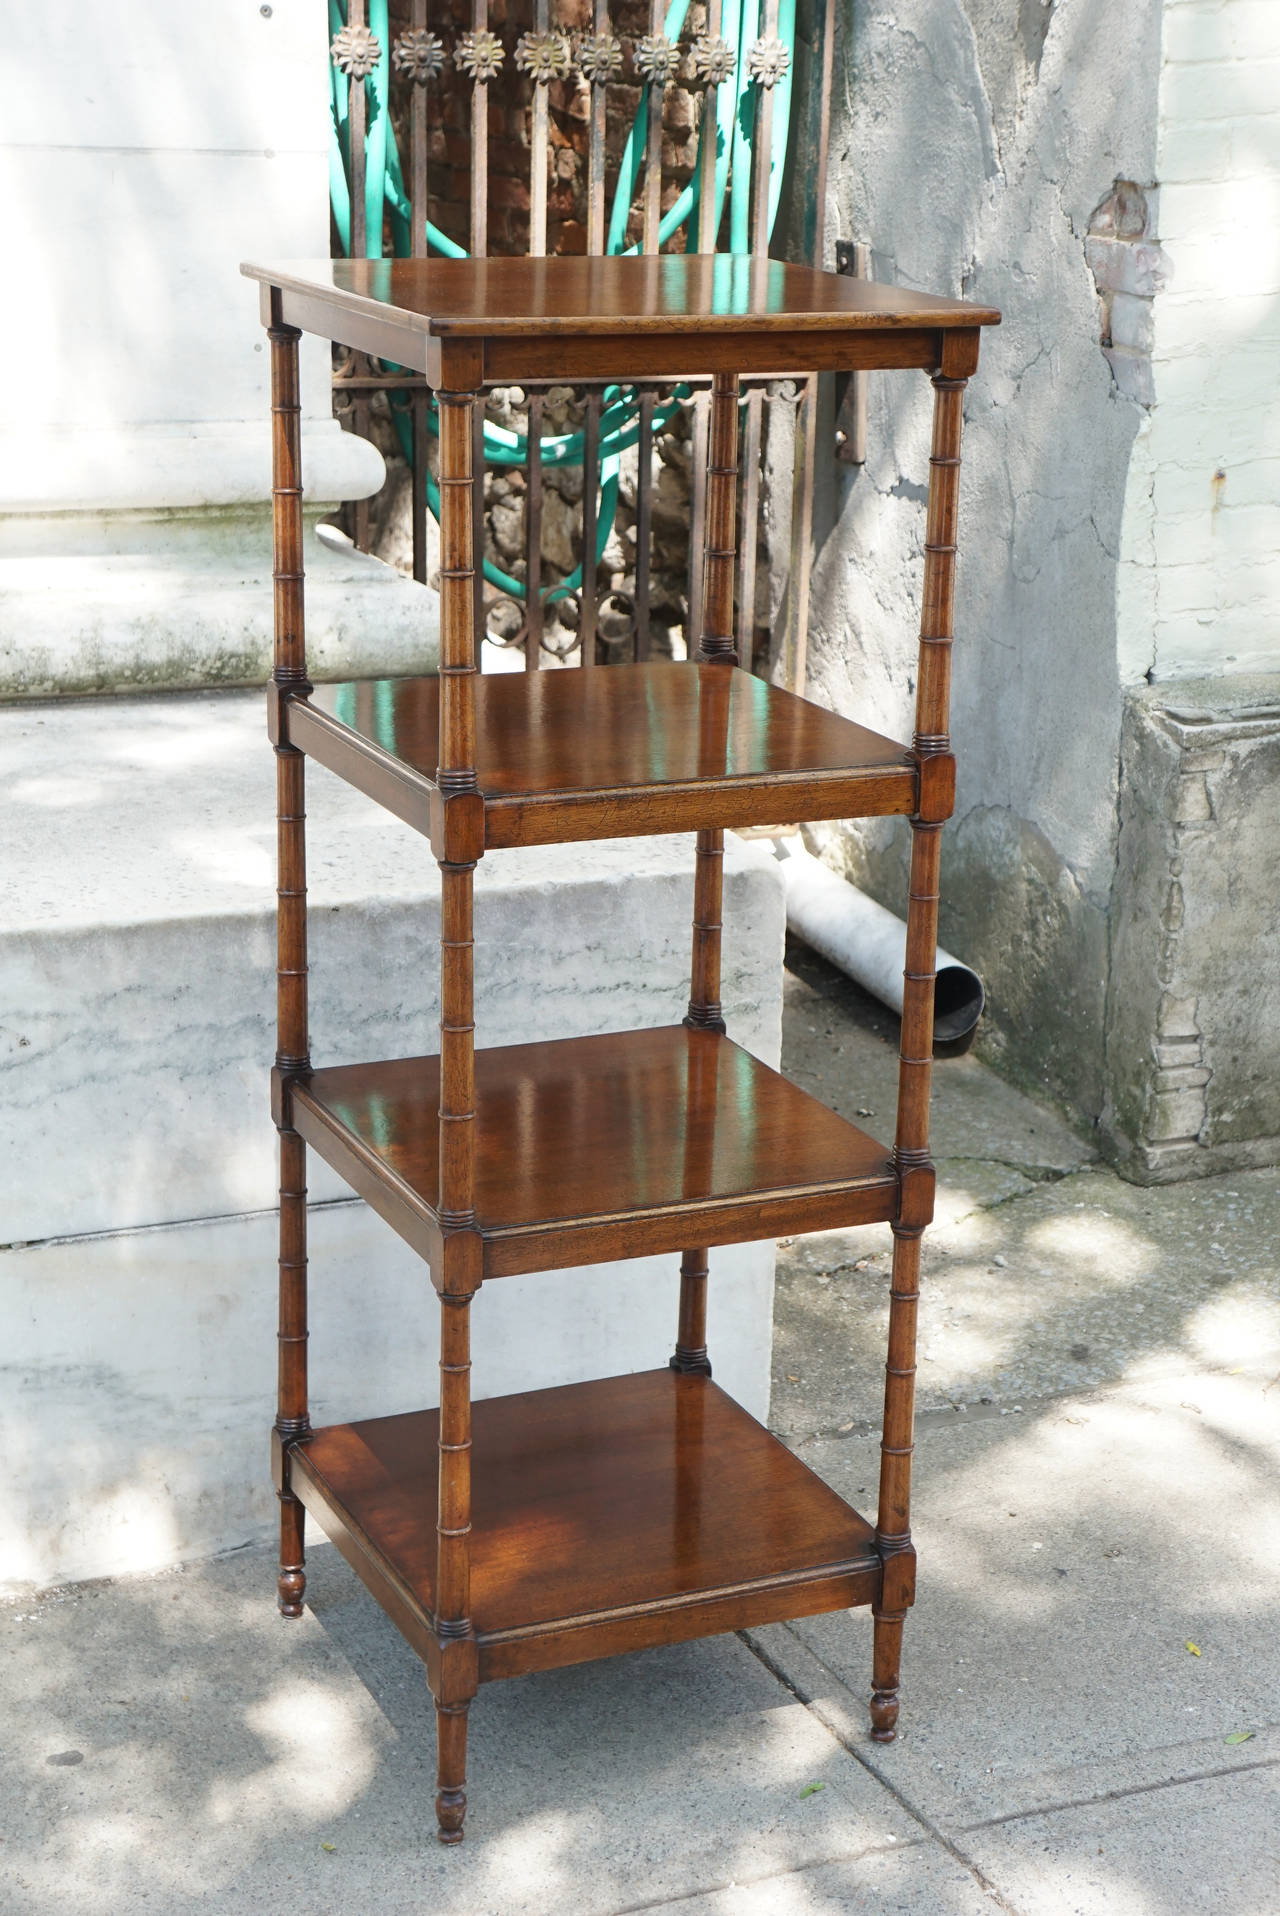 This nice Edwardian étagère with four tiers has a great old color and patina. The piece made from mahogany in England circa 1880-1900 to appear like Regency versions and without much change was and still is a staple of design usable in many